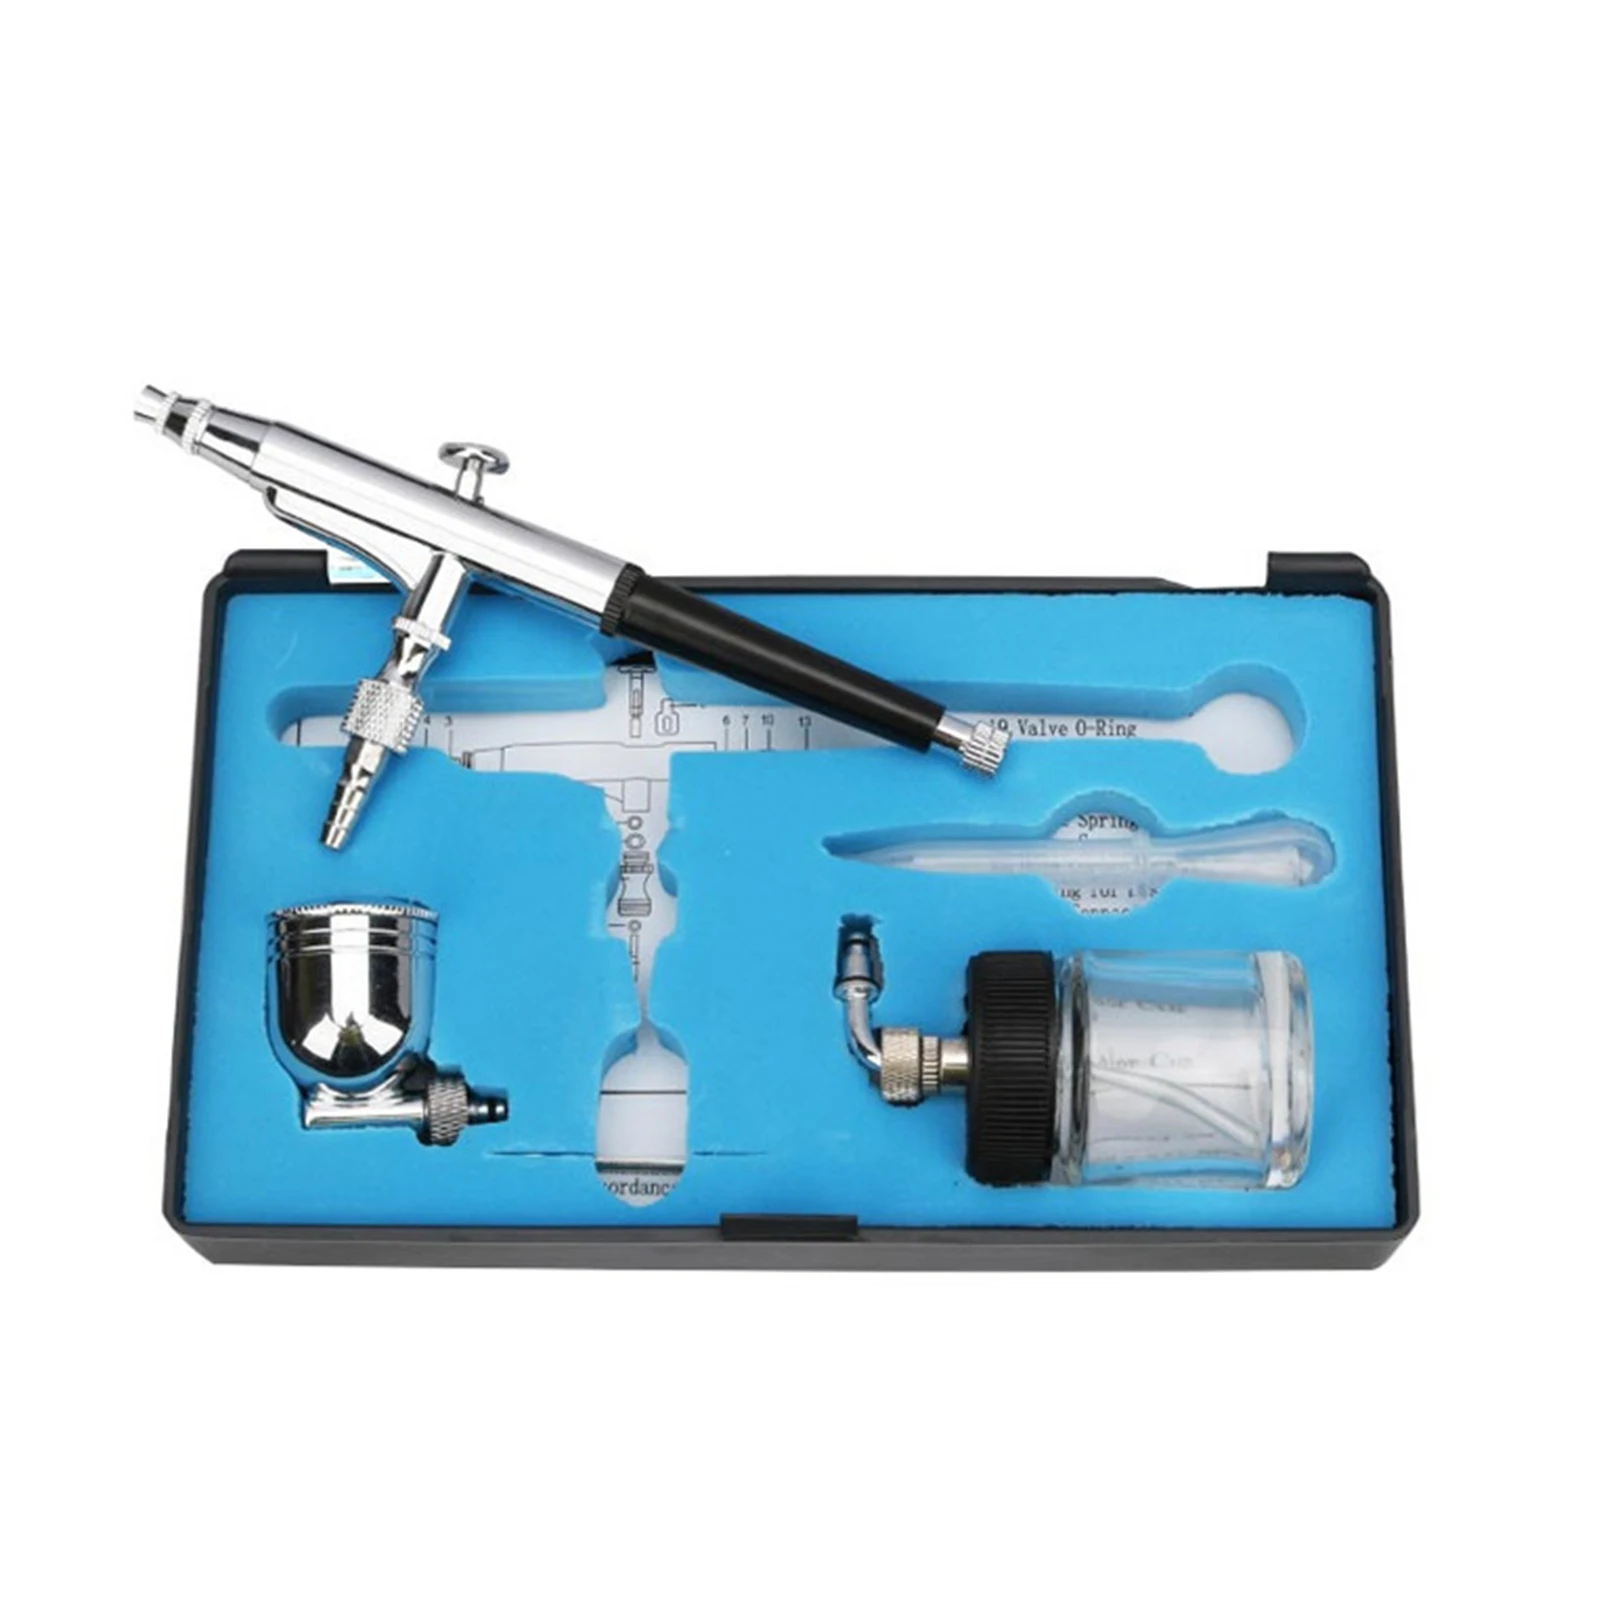 

Airbrush Gun Gravity Siphon Feed Airbrush 0.3mm Nozzle 22cc & 7cc Cups For Cake Decorating Model Painting Nail Art Auto Painting